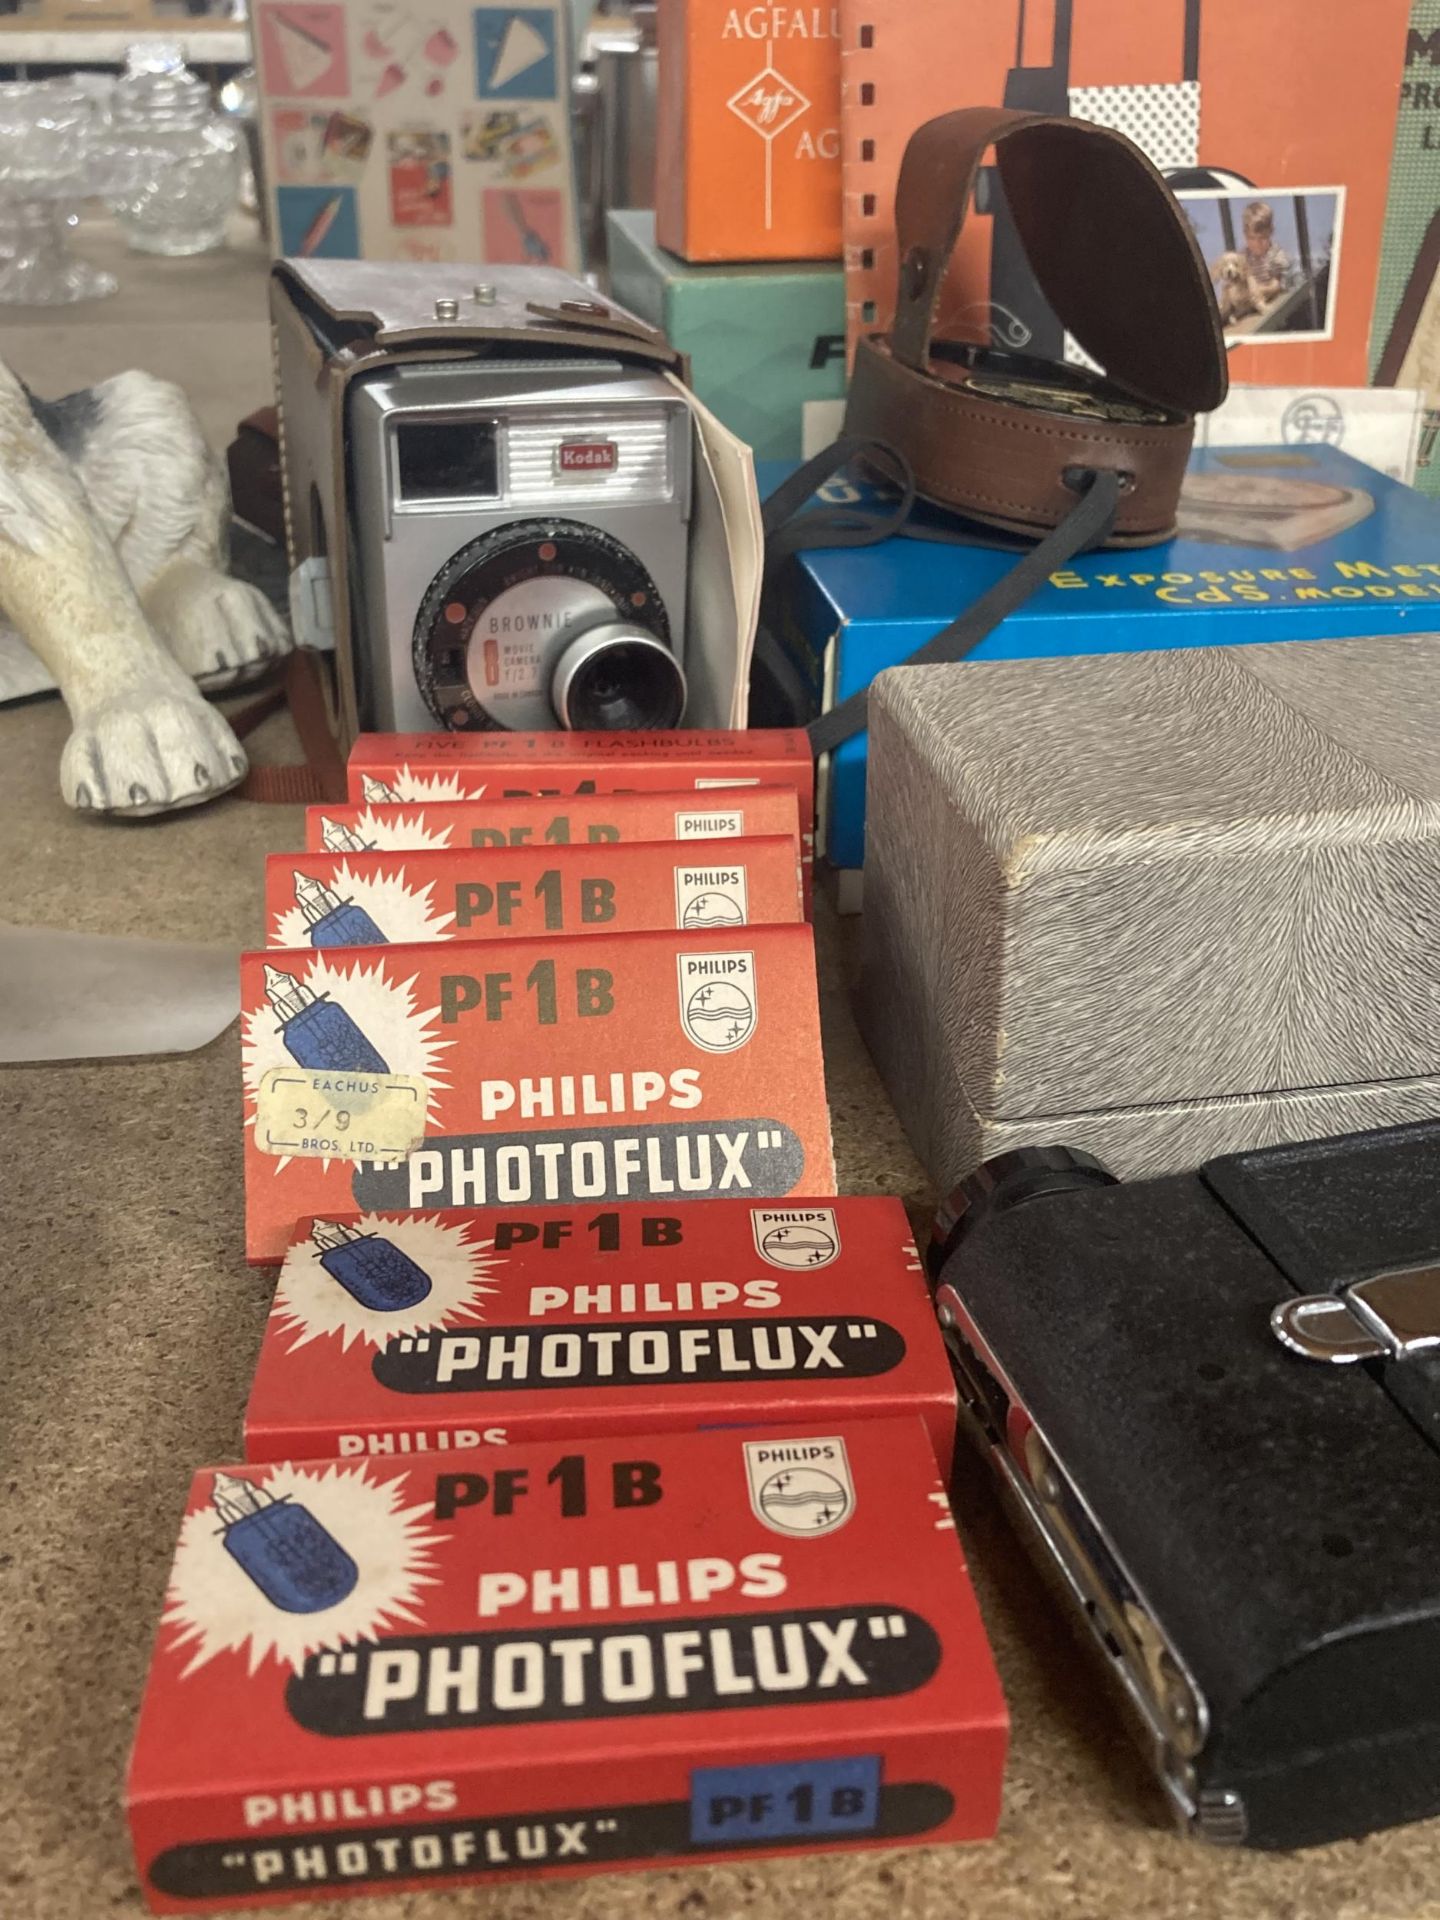 A VINTAGE KODAK BROWNIE MOVIE CAMERA IN CASE TOGETHER WITH BOXED PHOTOFLUX PF1B BOXED FLASH'S, MAZDA - Image 4 of 5